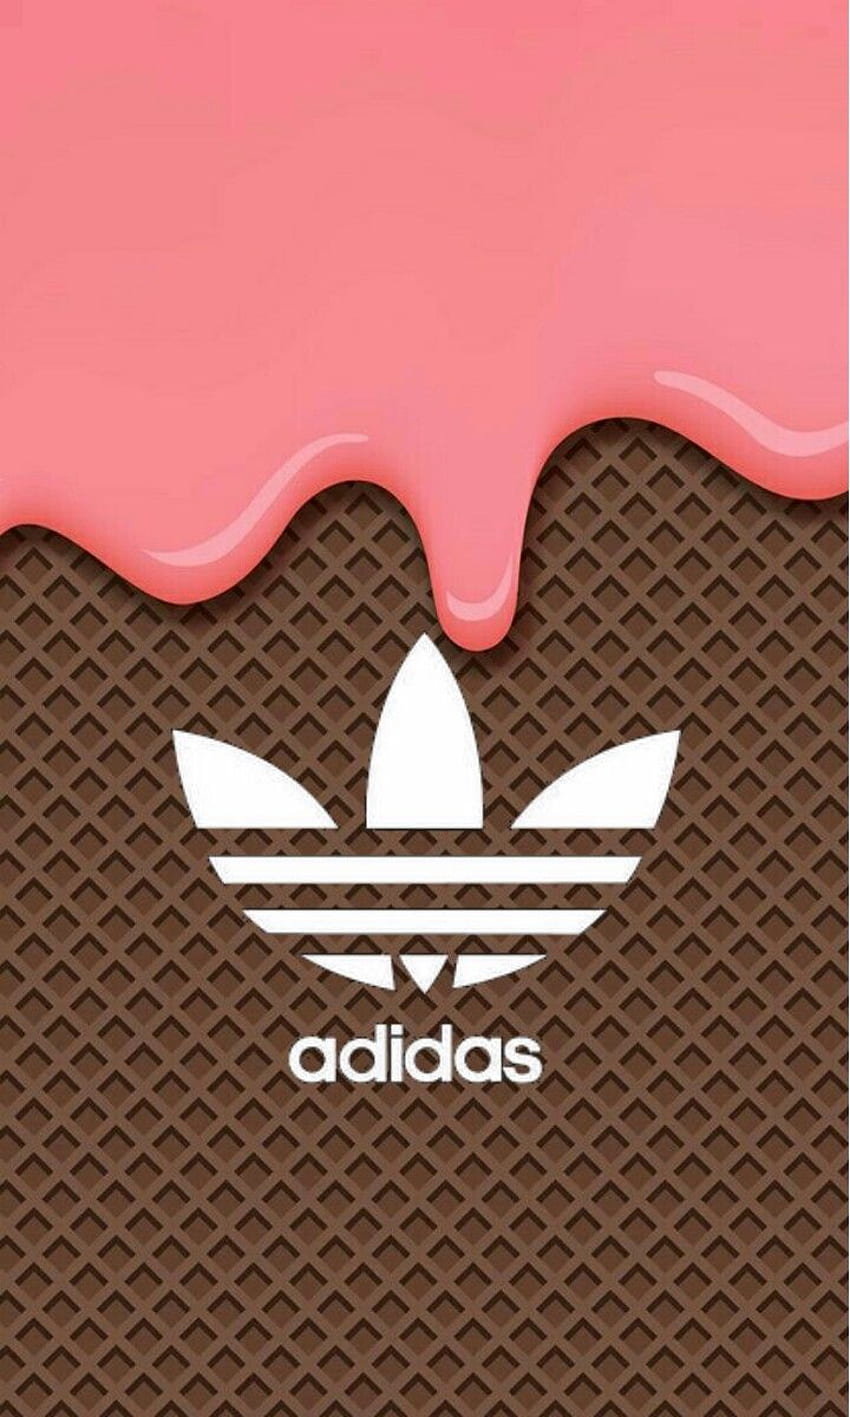 adidasshoes29 on Adidas Sneakers Nike [] for your , Mobile & Tablet. Explore Adidas Shoes Logo Neon. Adidas Shoes Logo Neon, Adidas Logo HD phone wallpaper